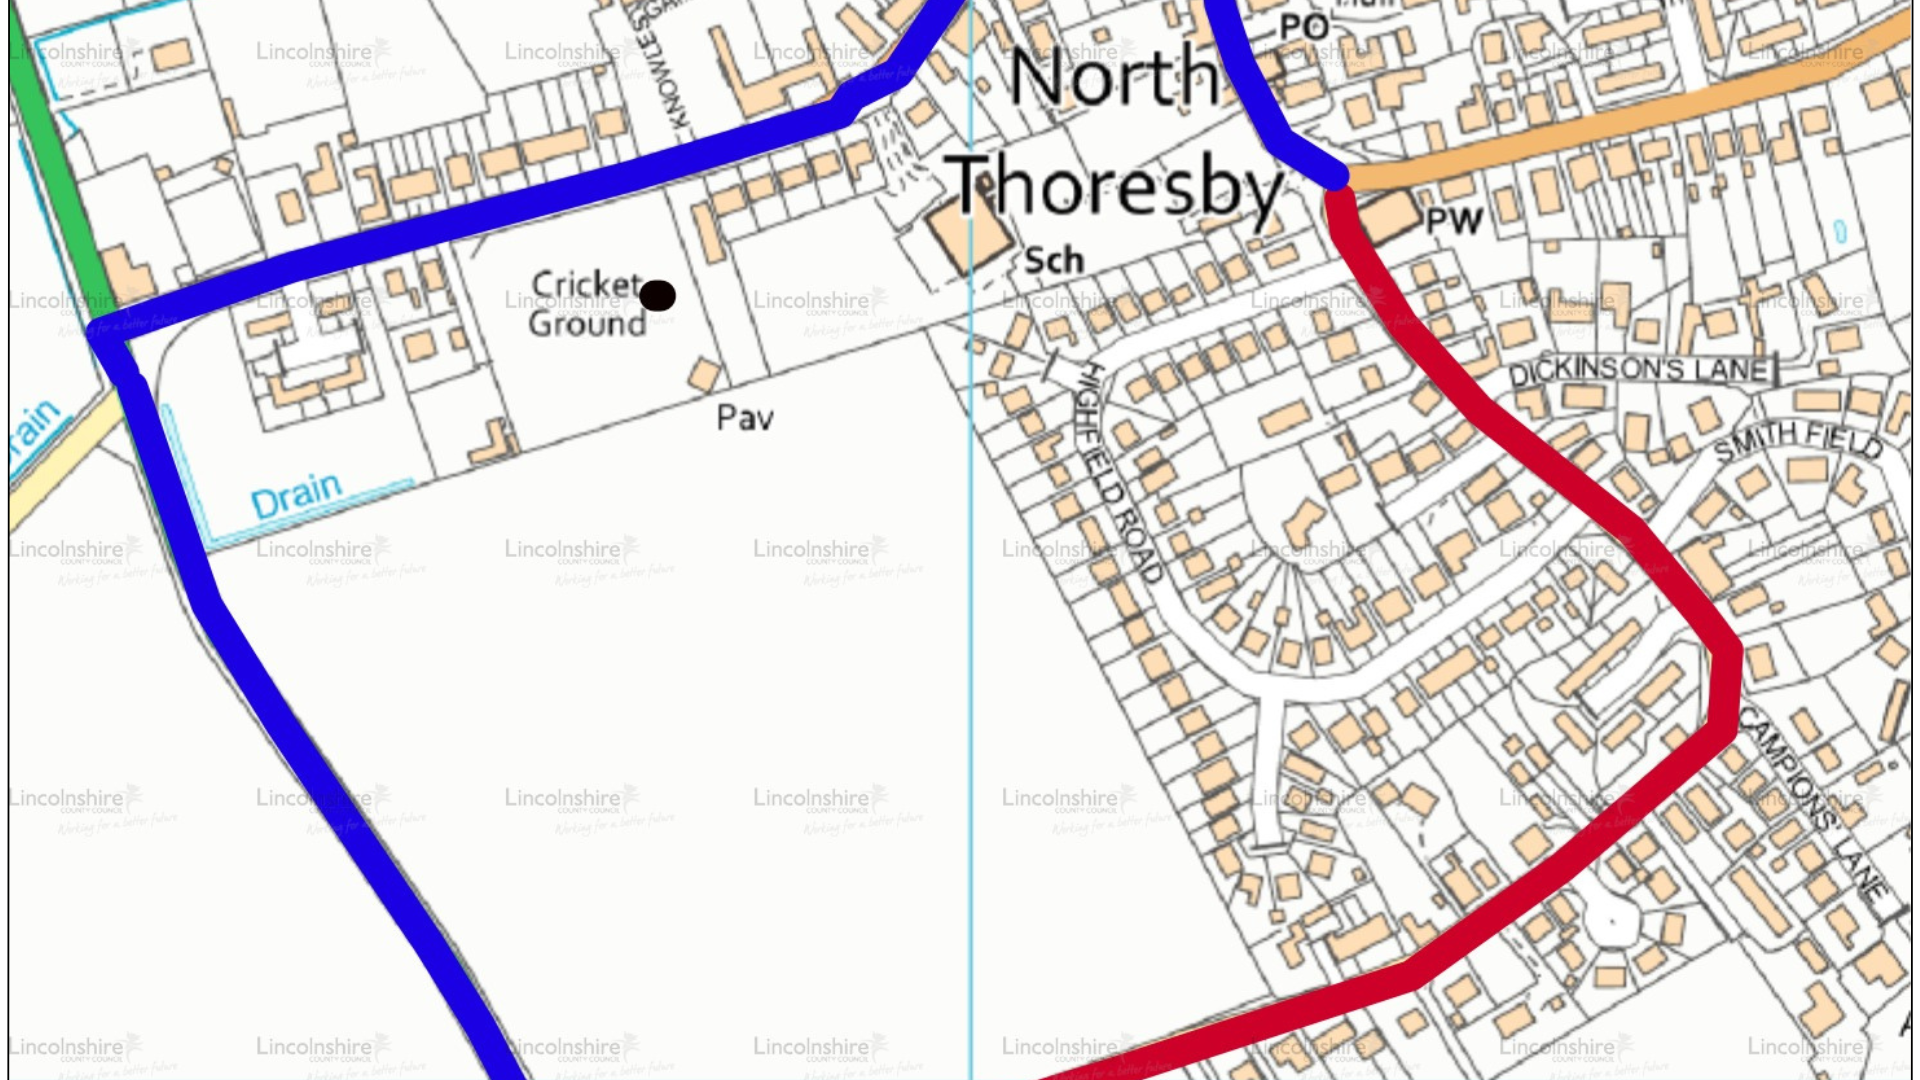 The diversion route for the North Thoresby works